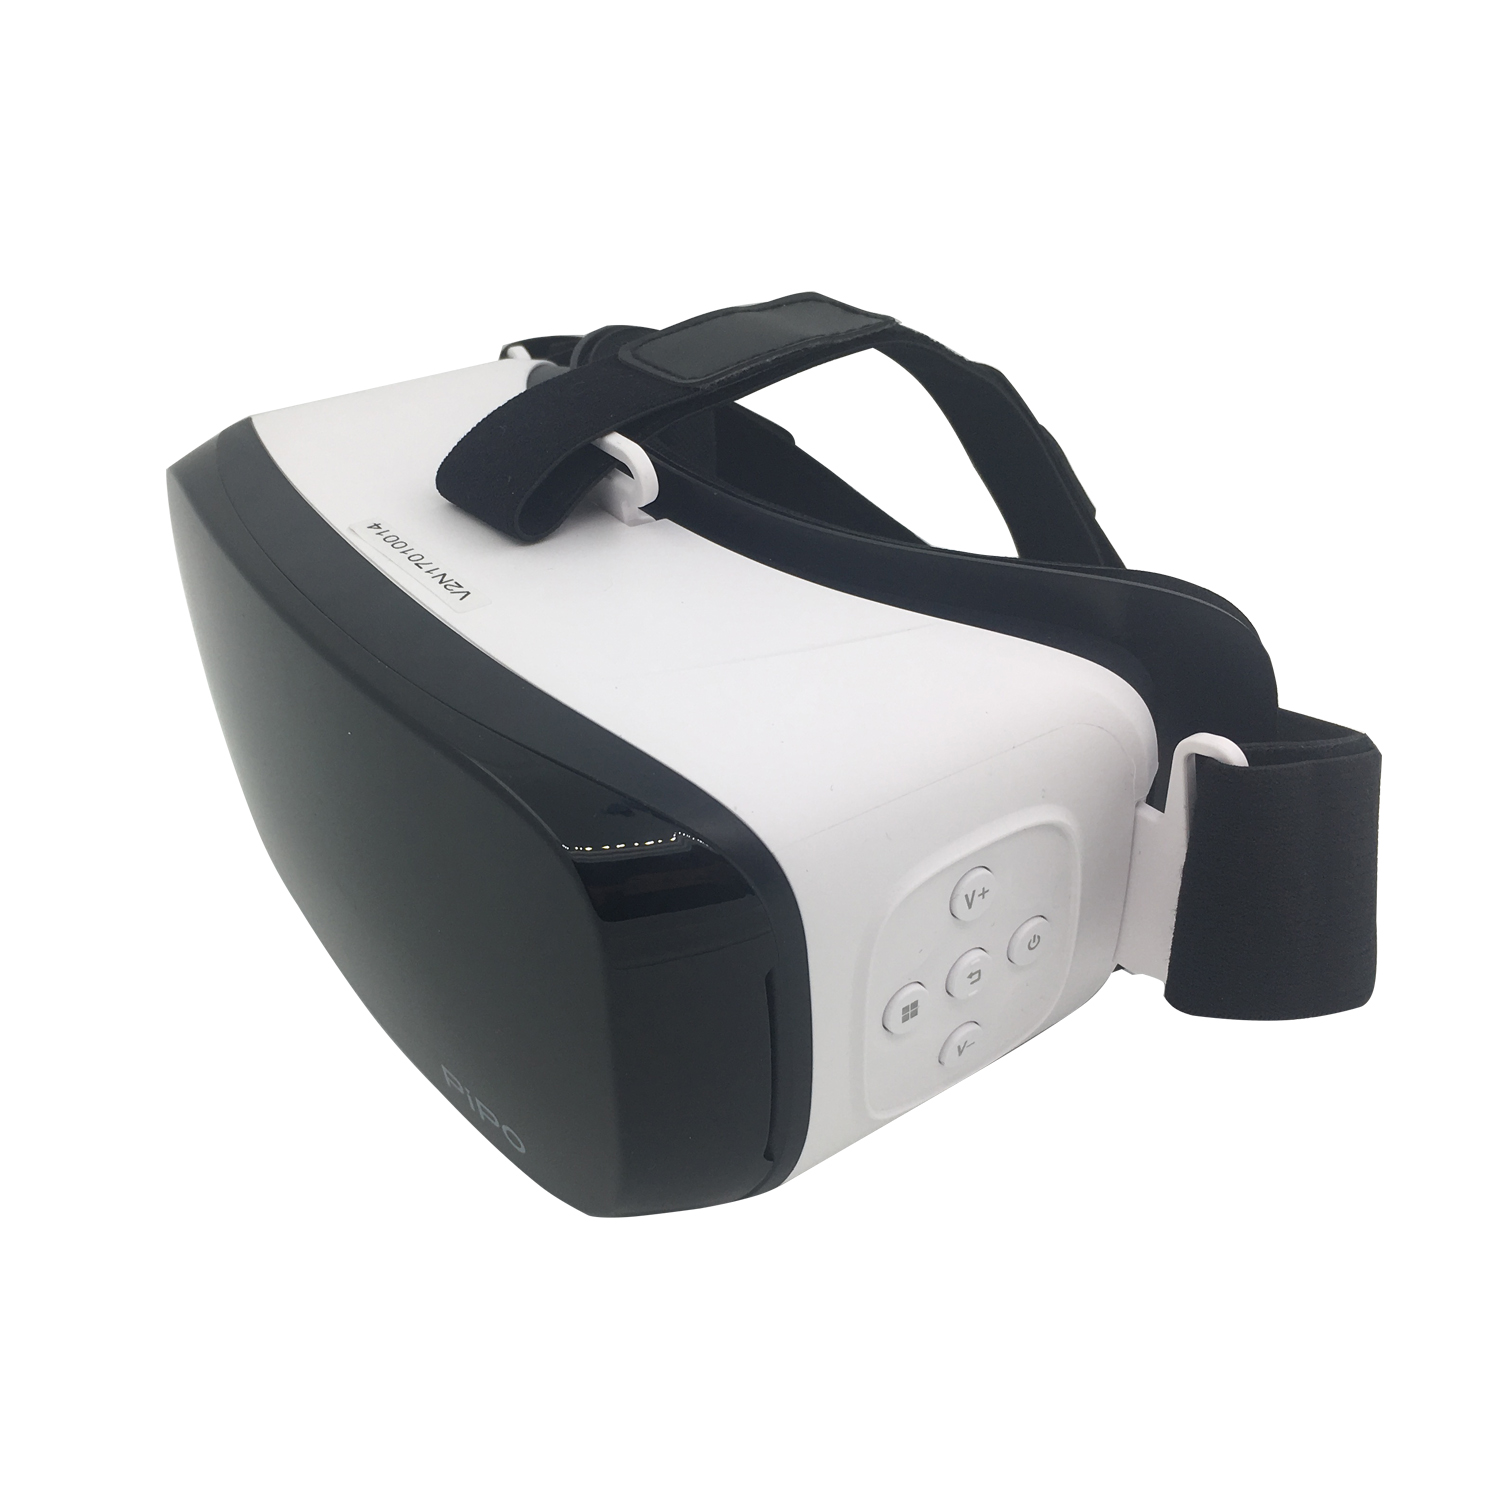 

PiPO V2 All-in-one 3D VR Glasses WiFi 1080P FHD RK3288 Quad Core Virtual Reality Headset